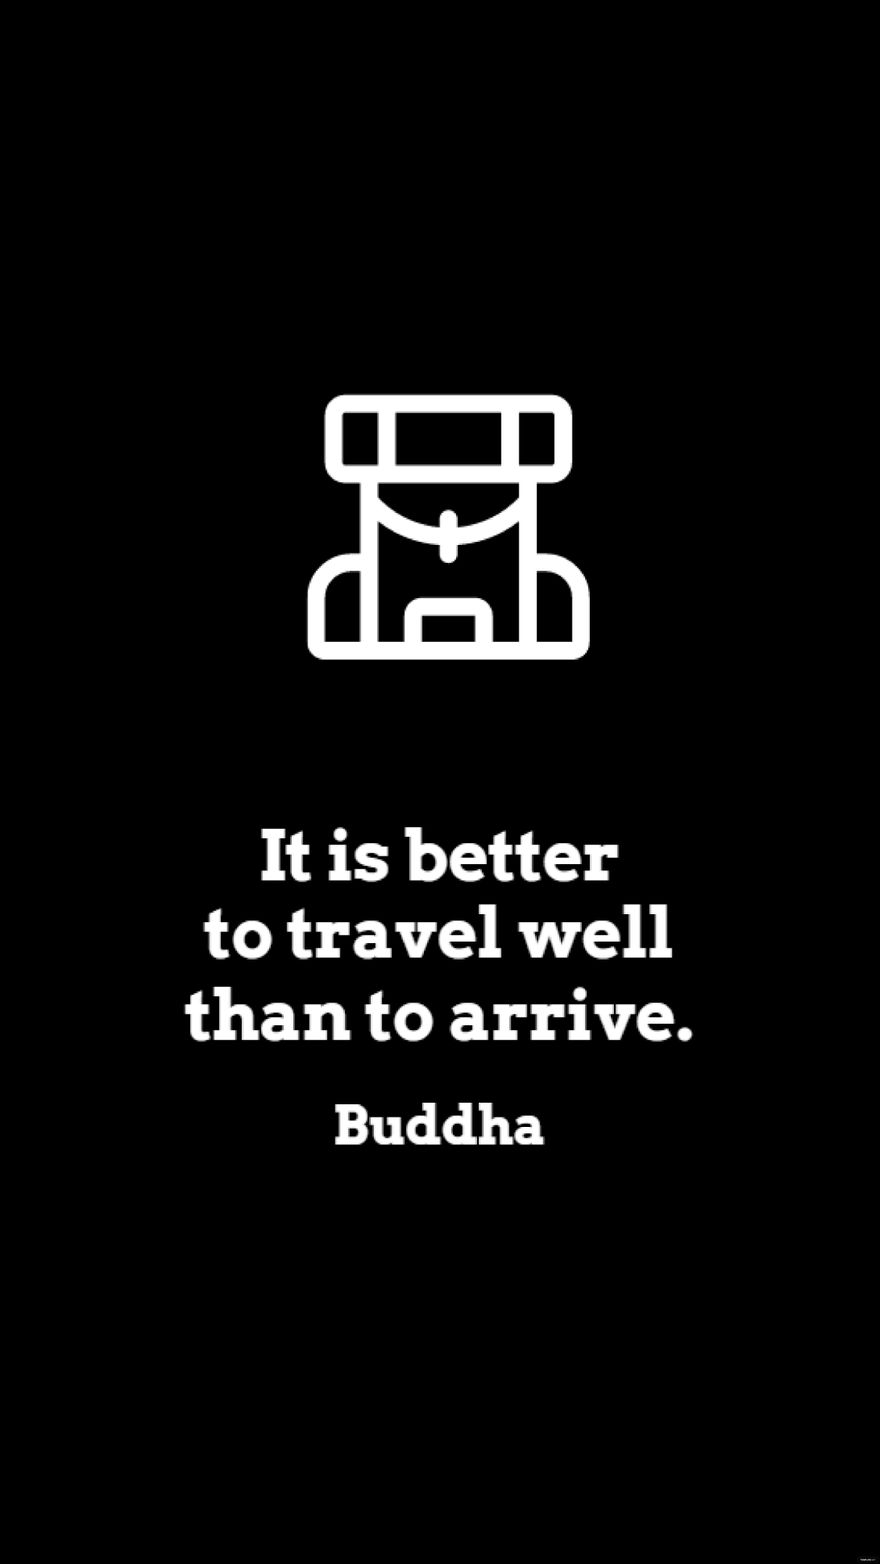 Buddha - It is better to travel well than to arrive.